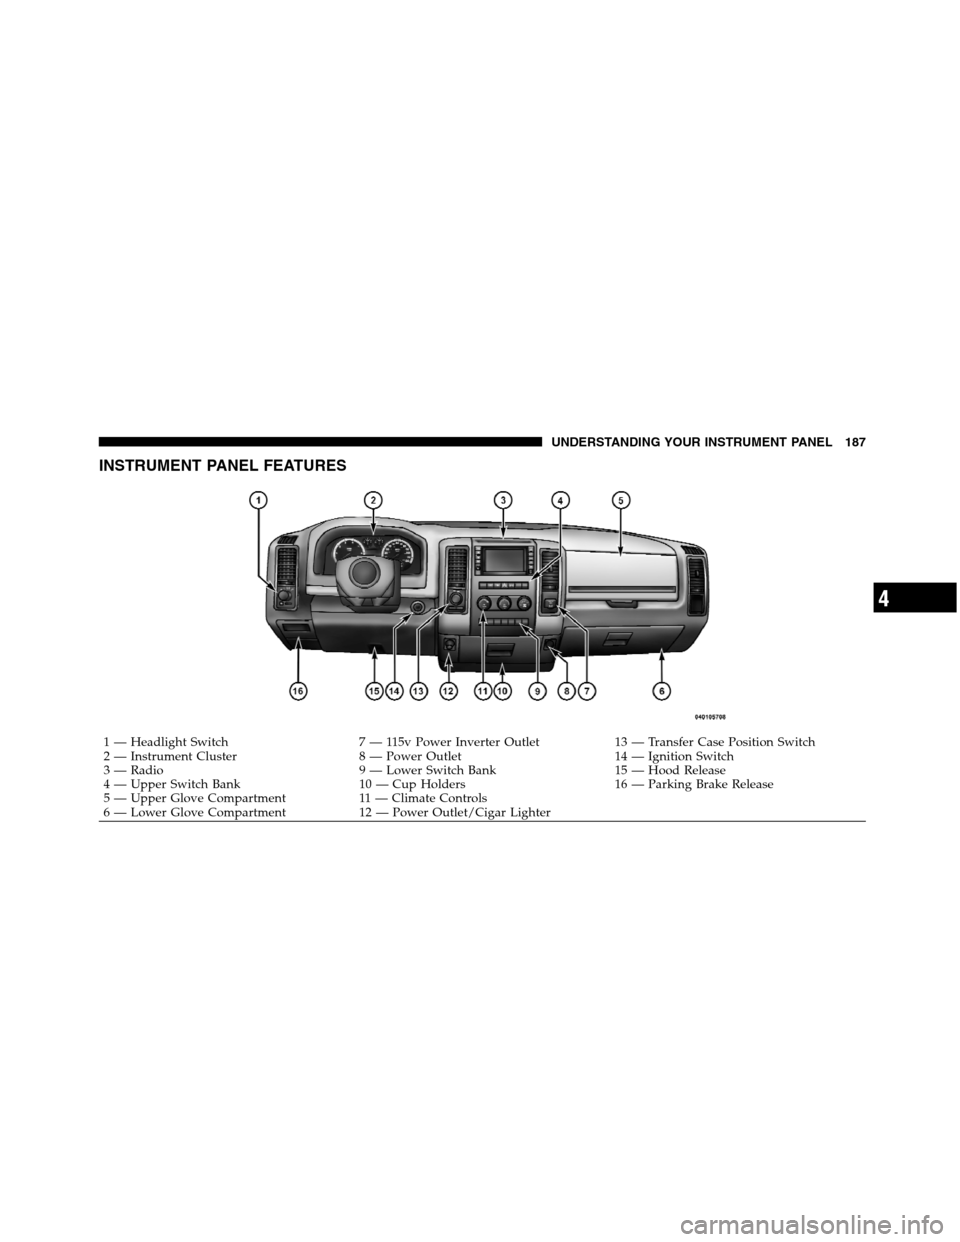 Ram 5500 Chassis Cab 2012  Owners Manual INSTRUMENT PANEL FEATURES
1 — Headlight Switch 7 — 115v Power Inverter Outlet 13 — Transfer Case Position Switch
2 — Instrument Cluster 8 — Power Outlet 14 — Ignition Switch
3 — Radio 9 